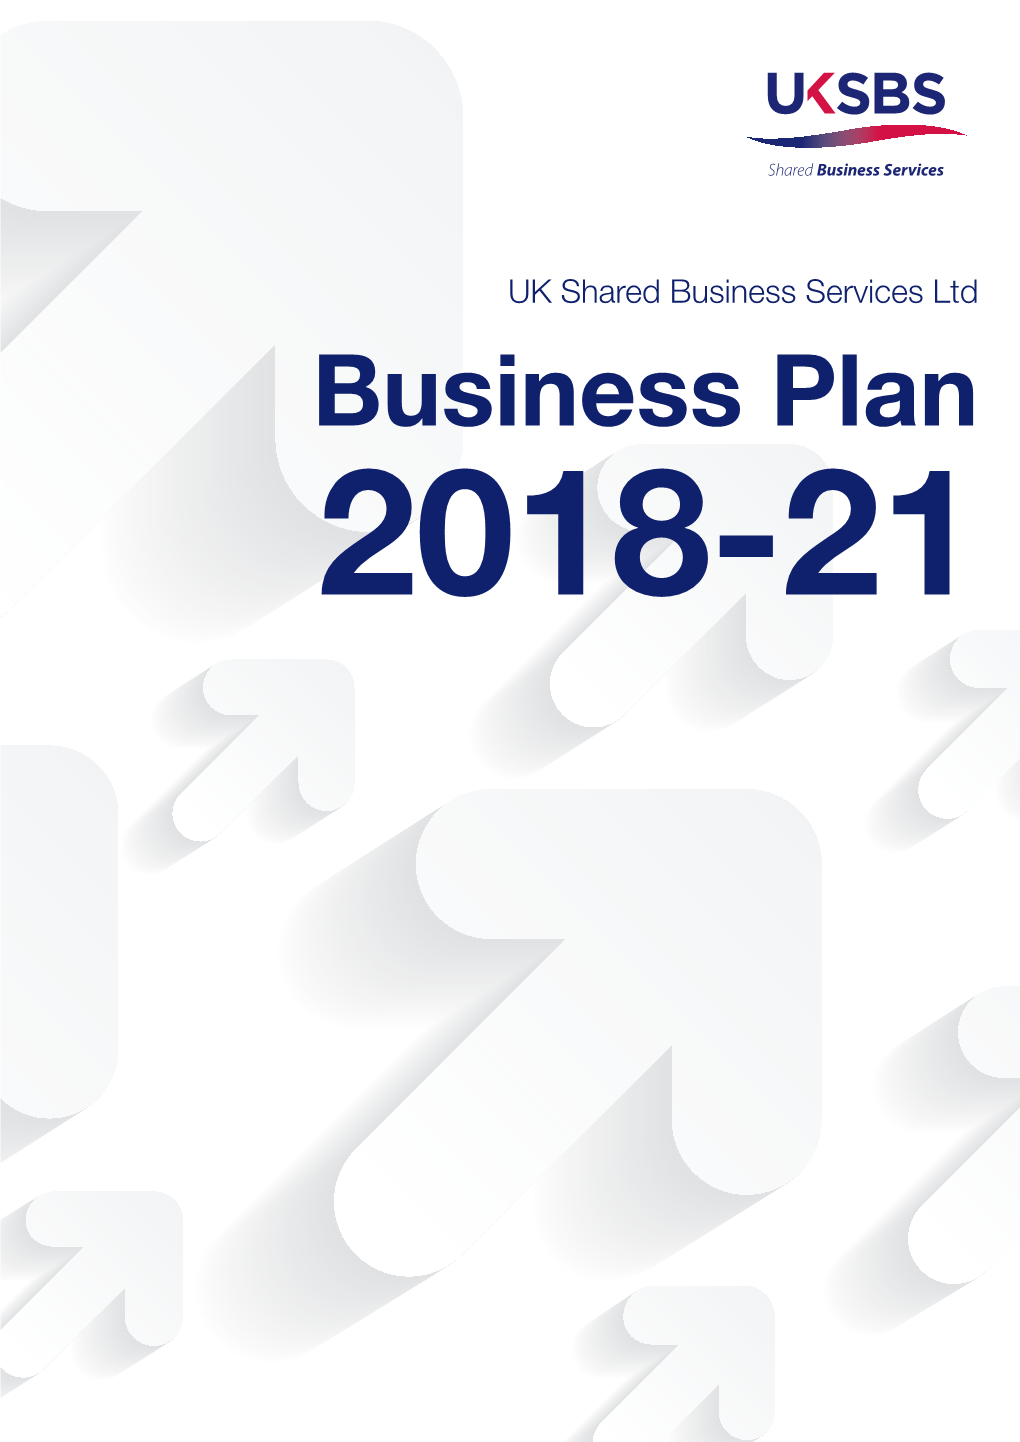 Business Plan 2018-21 Introduction